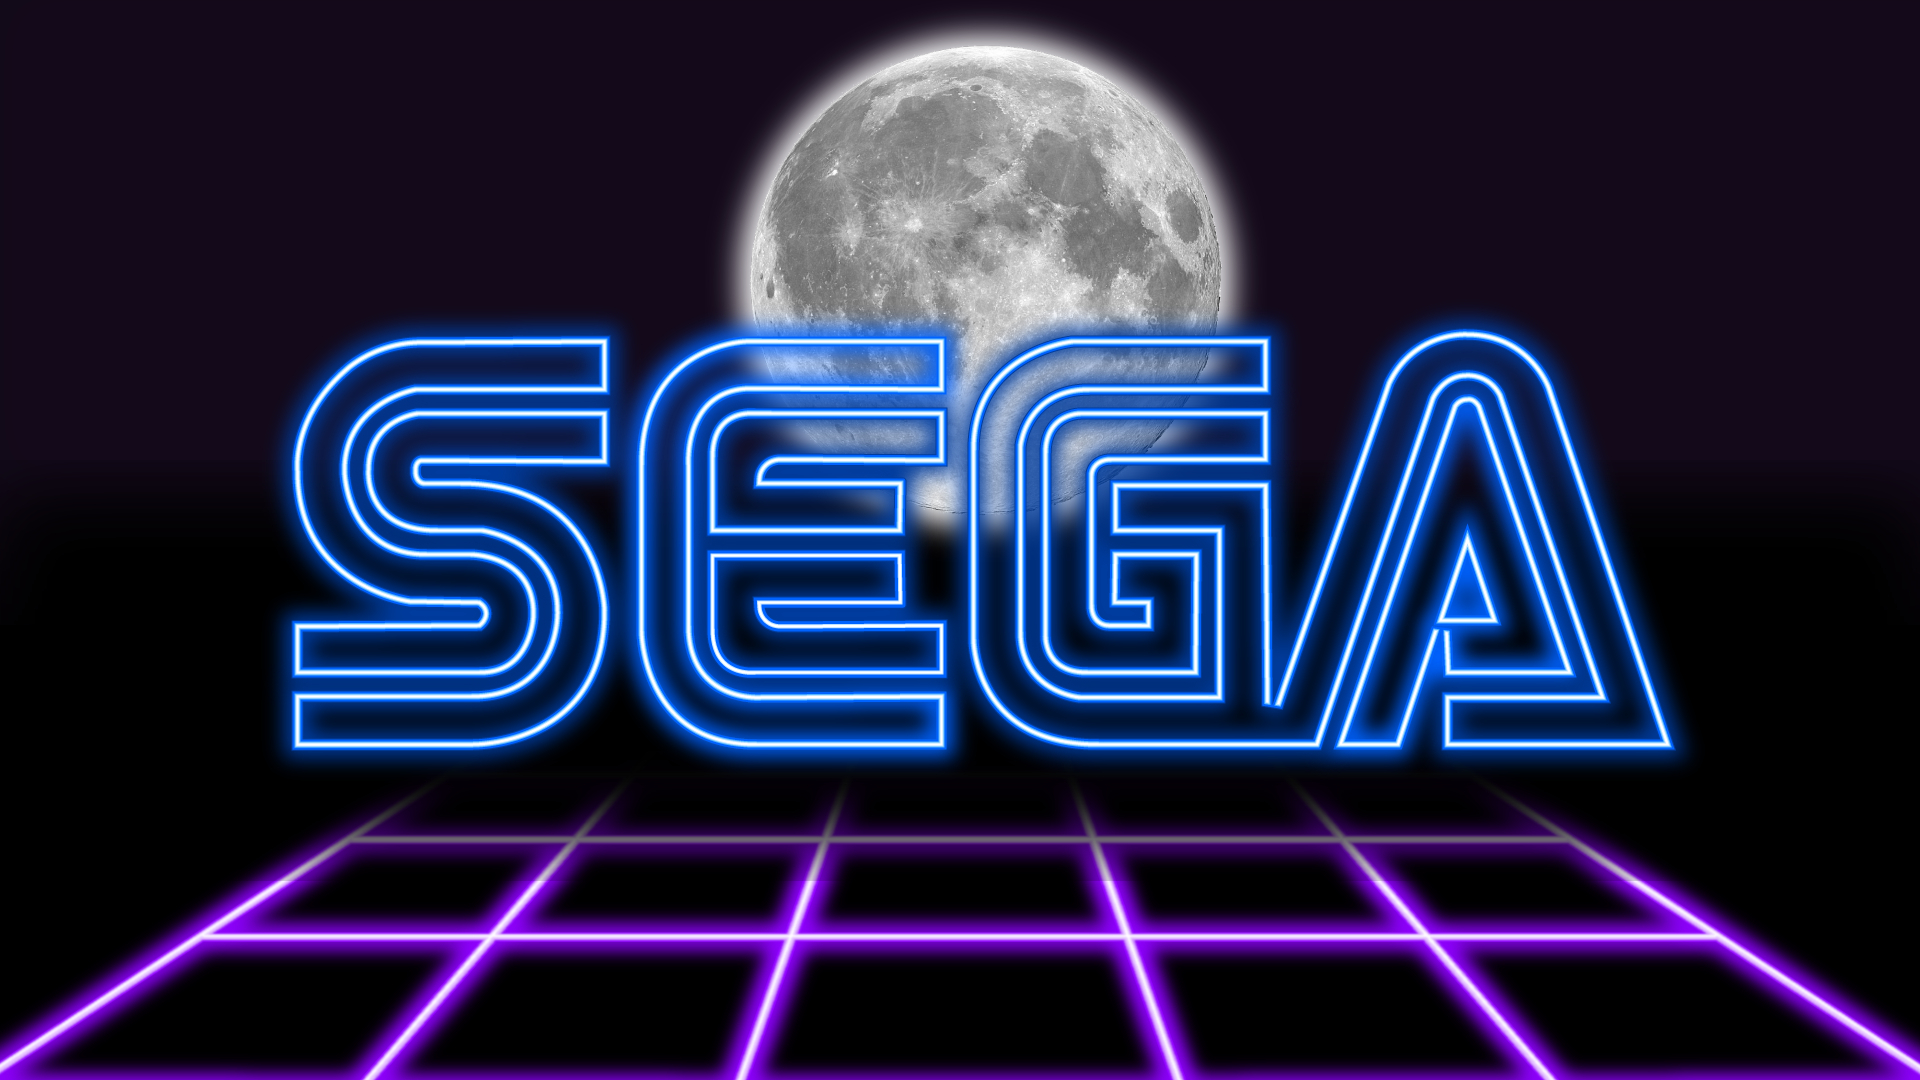 1920x1080 I made some Sega Console wallpapers, you can use them if you like : r/SEGA